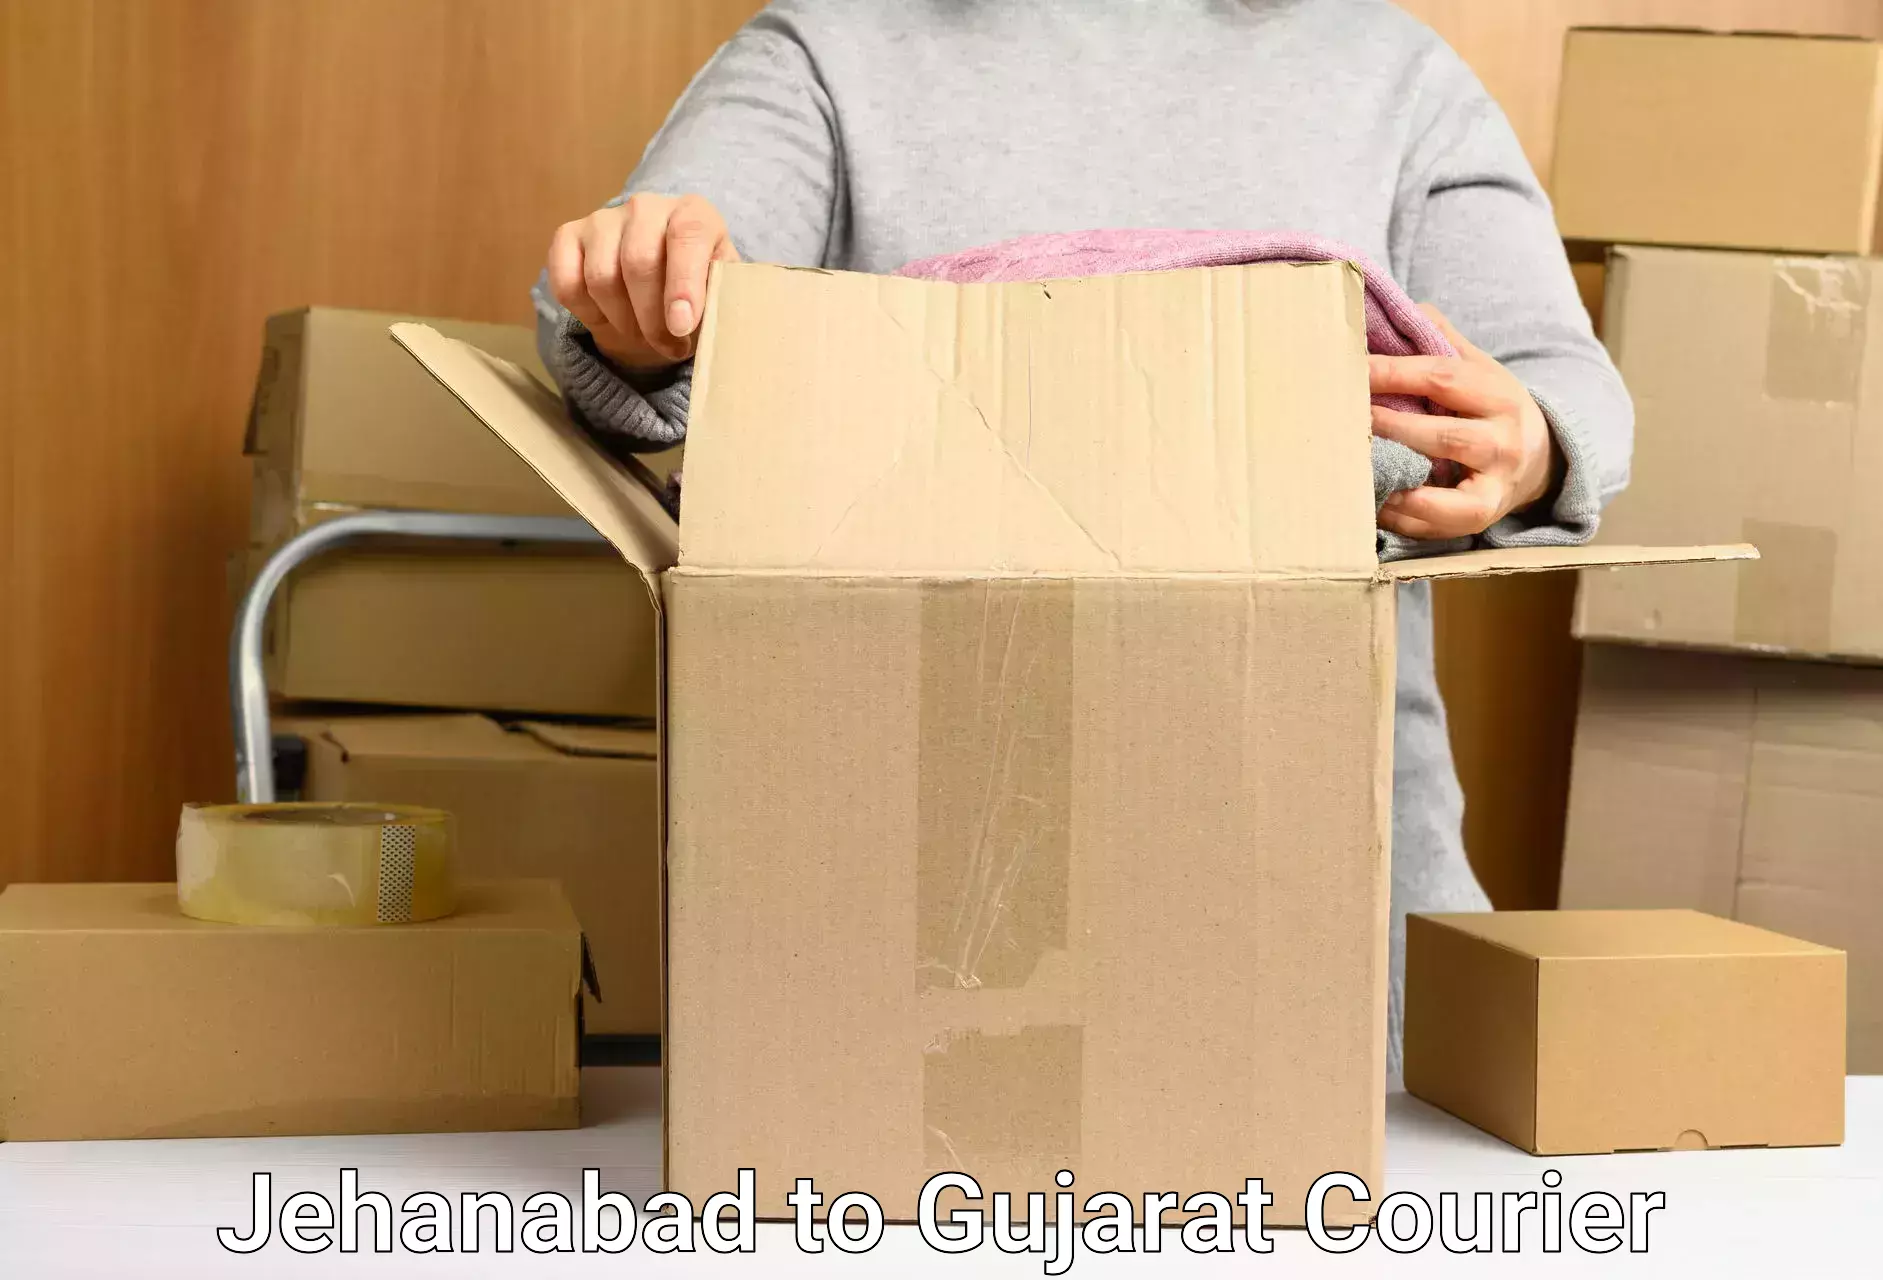 Global shipping networks Jehanabad to Gujarat